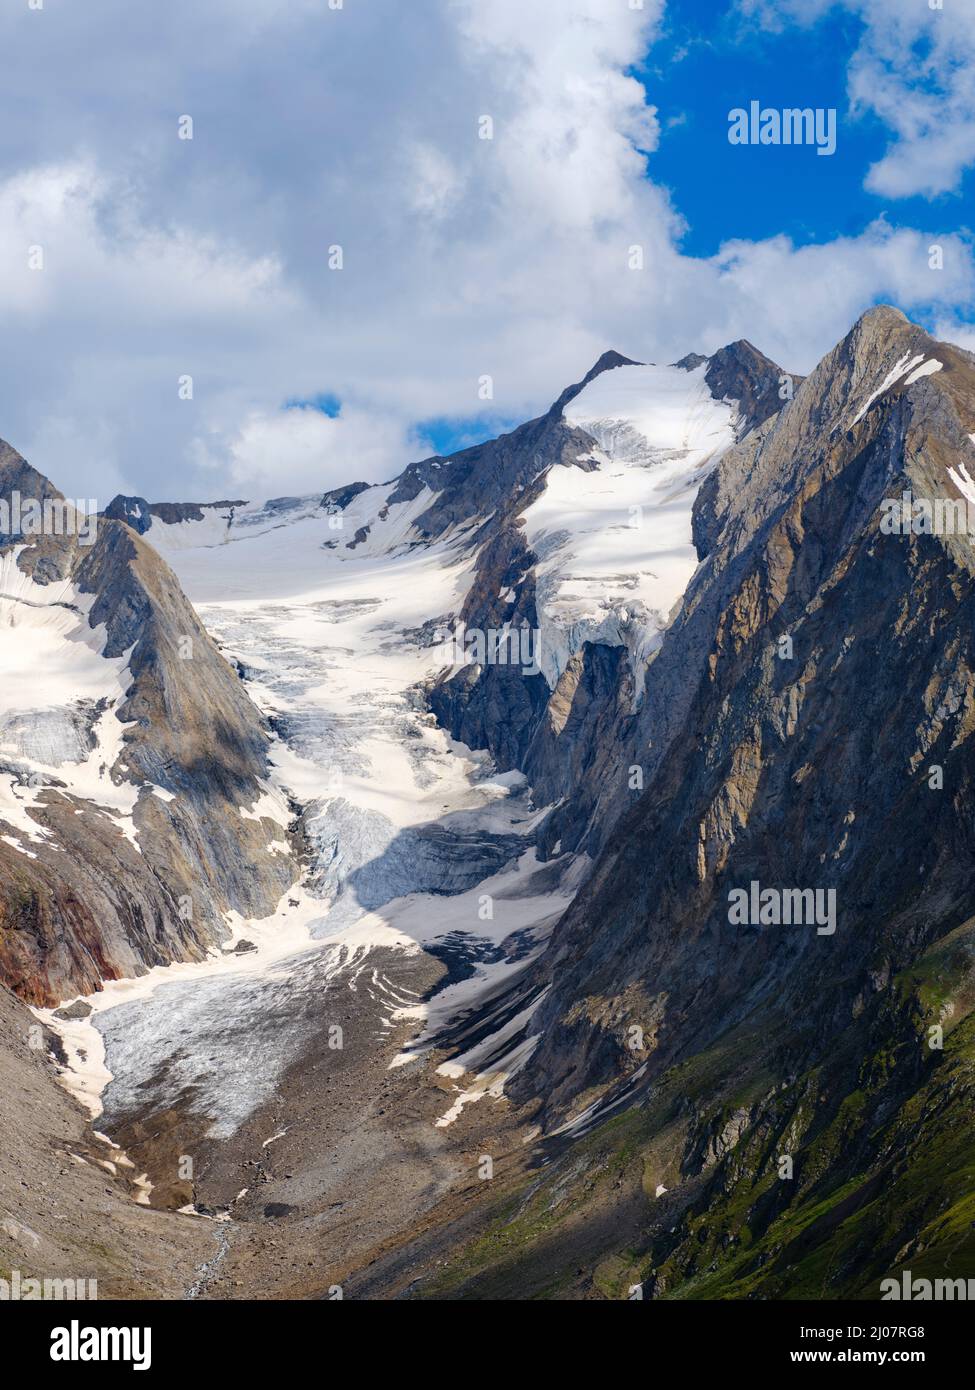 Valley Gaisbergtal and Mt. Lieberkogel seen from Mt. Hohe Mut. Oetztal Alps in the nature park Oetztal near village Obergurgl. Europe, Austria, Tyrol Stock Photo